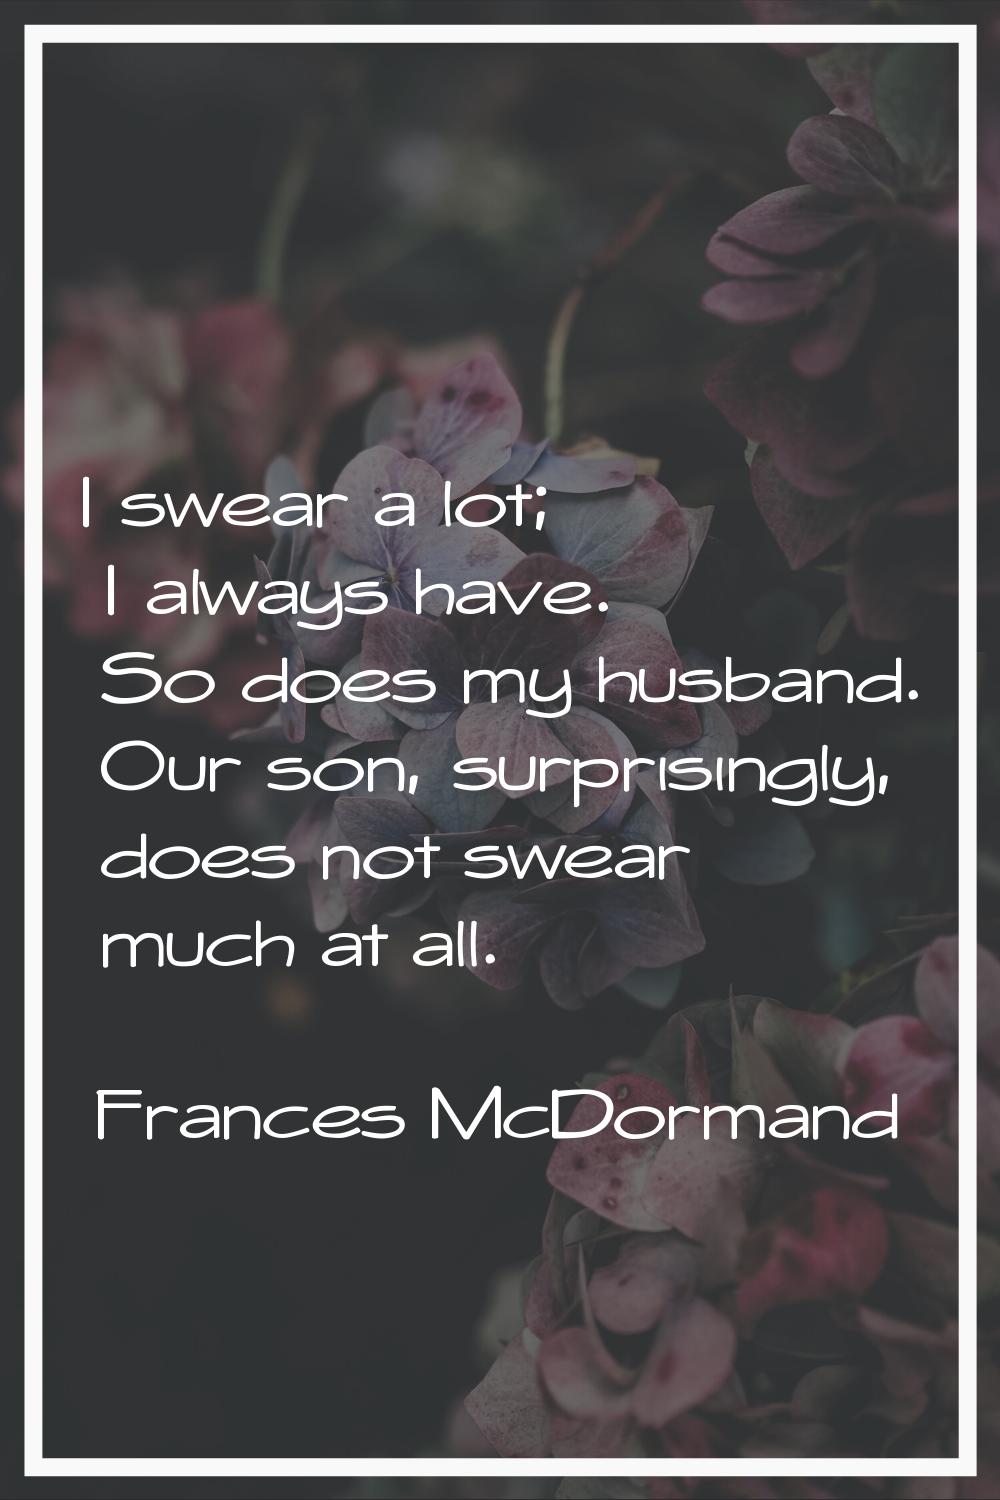 I swear a lot; I always have. So does my husband. Our son, surprisingly, does not swear much at all